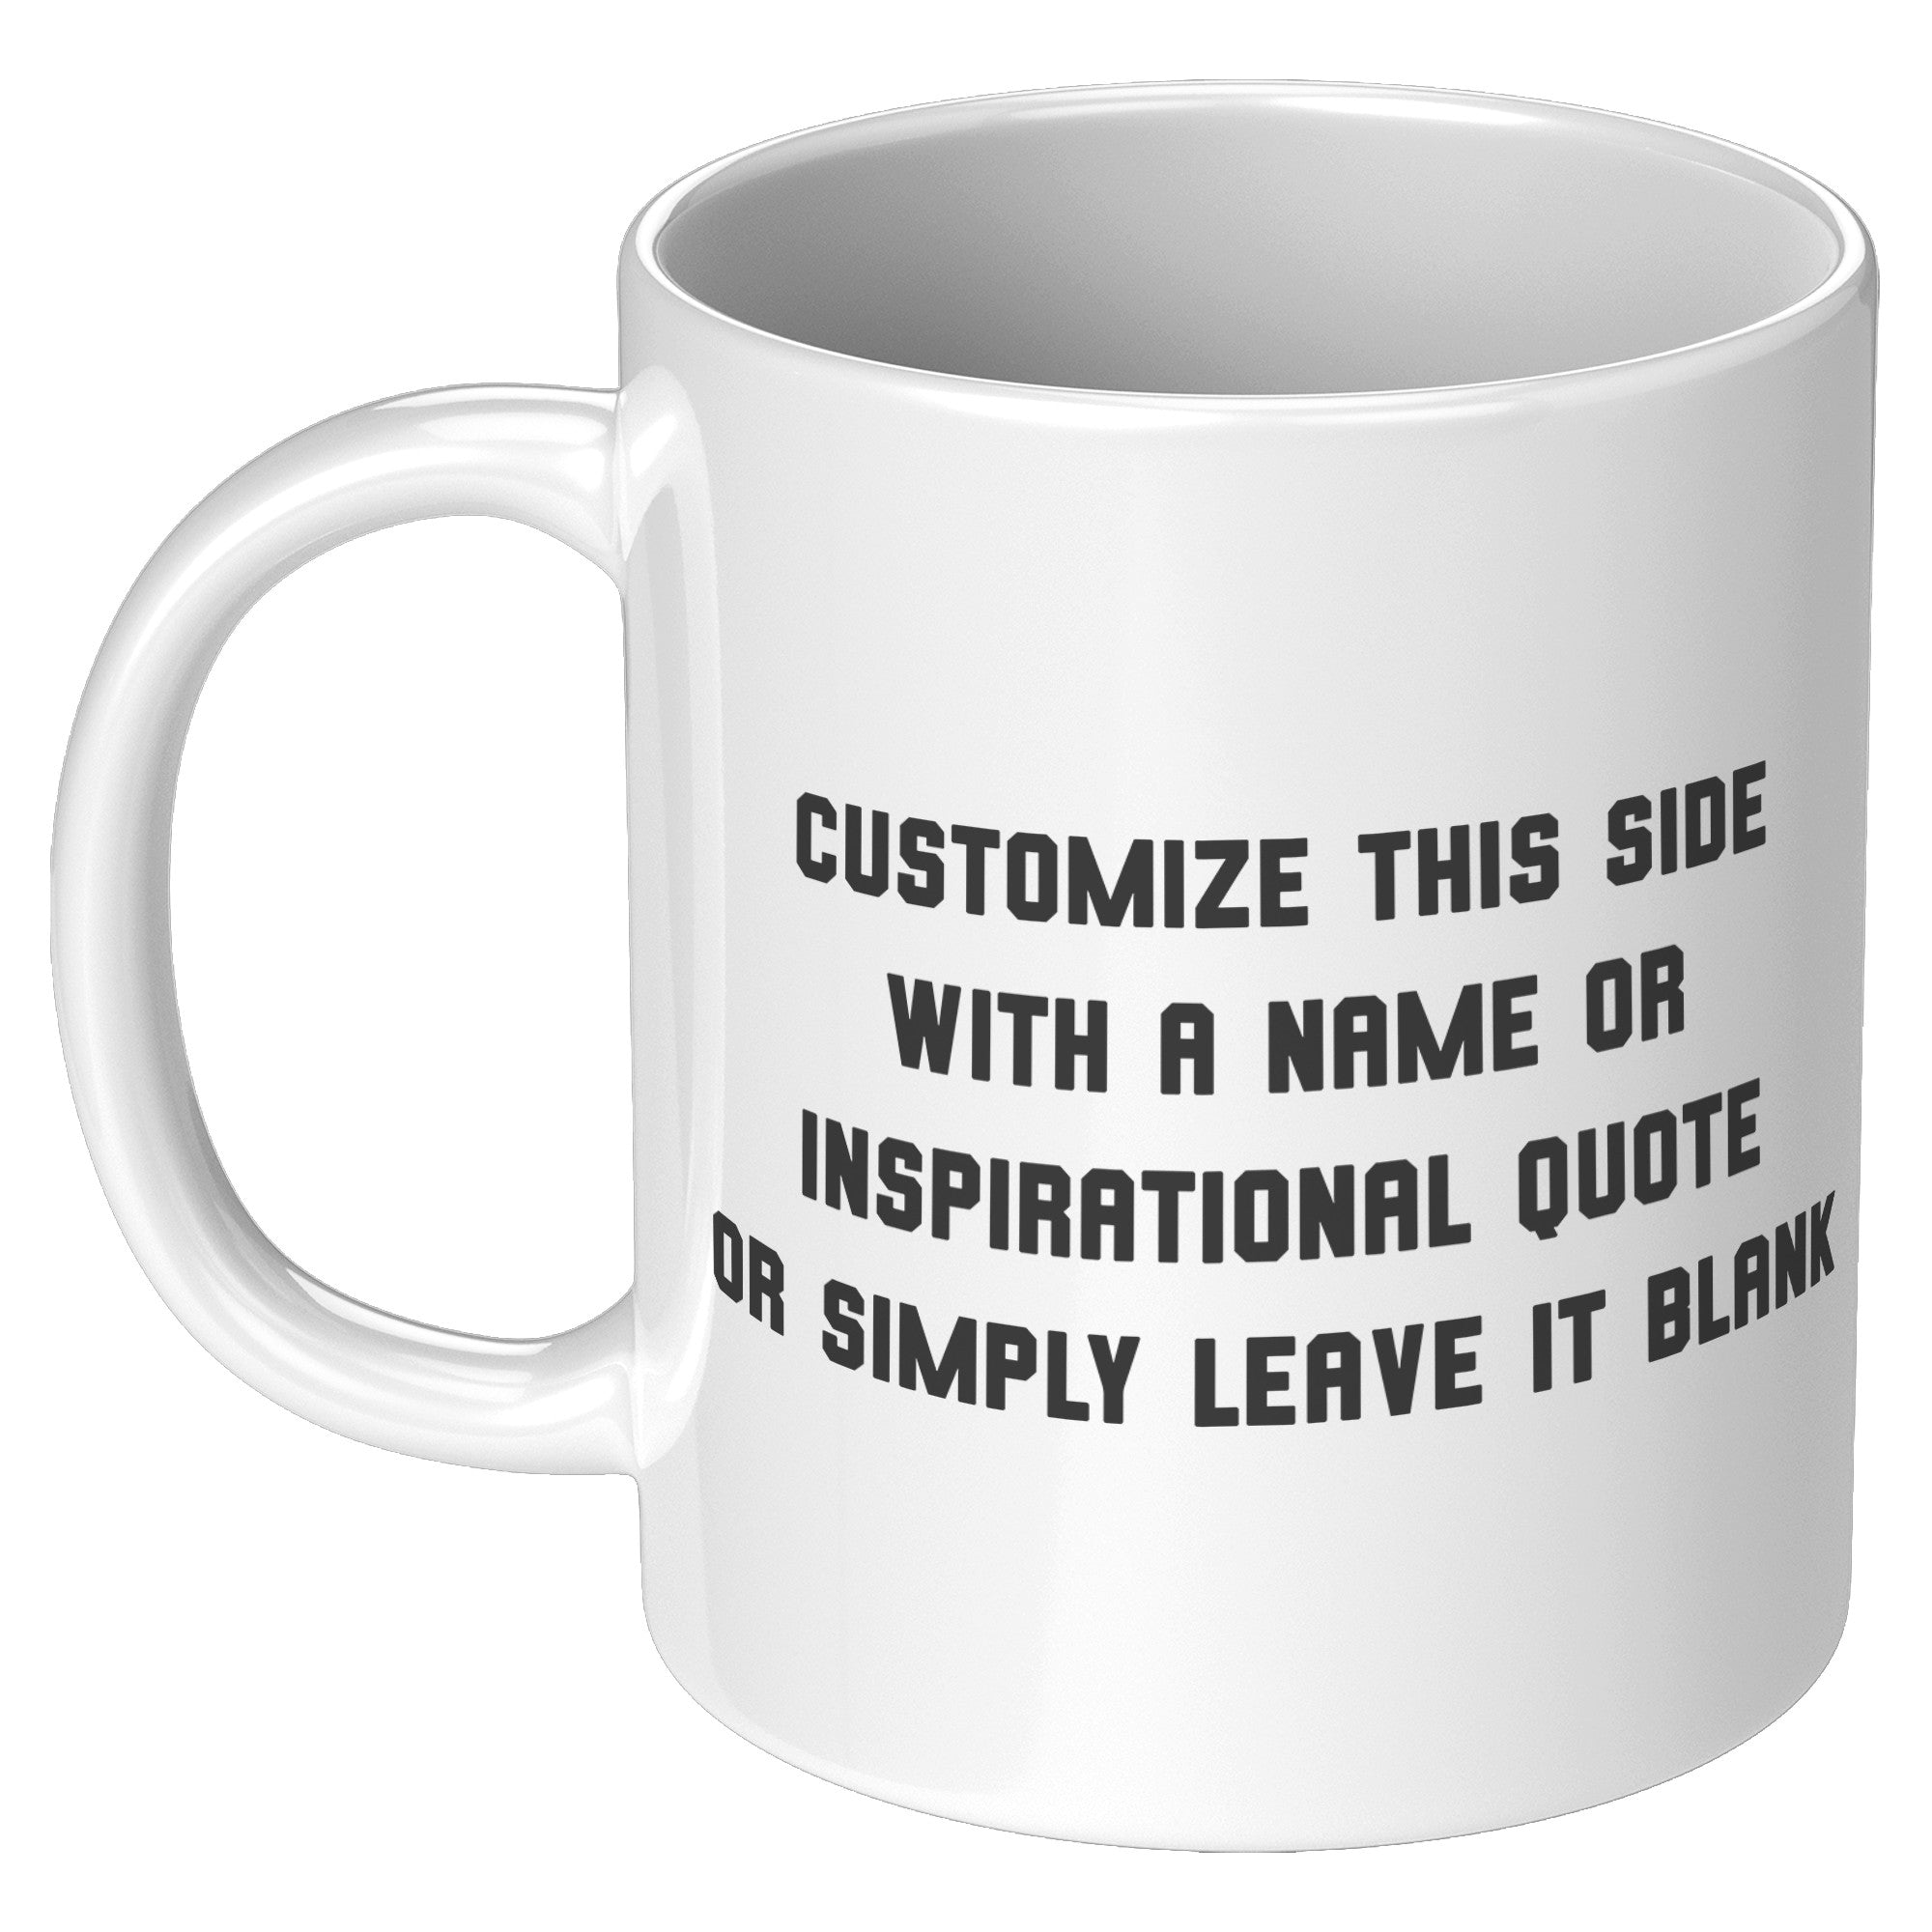 Male Runner Inspirational Mug - Motivational Running Quotes Cup - Perfect Gift for Marathon Men - Runner's Daily Dose of Determination - A